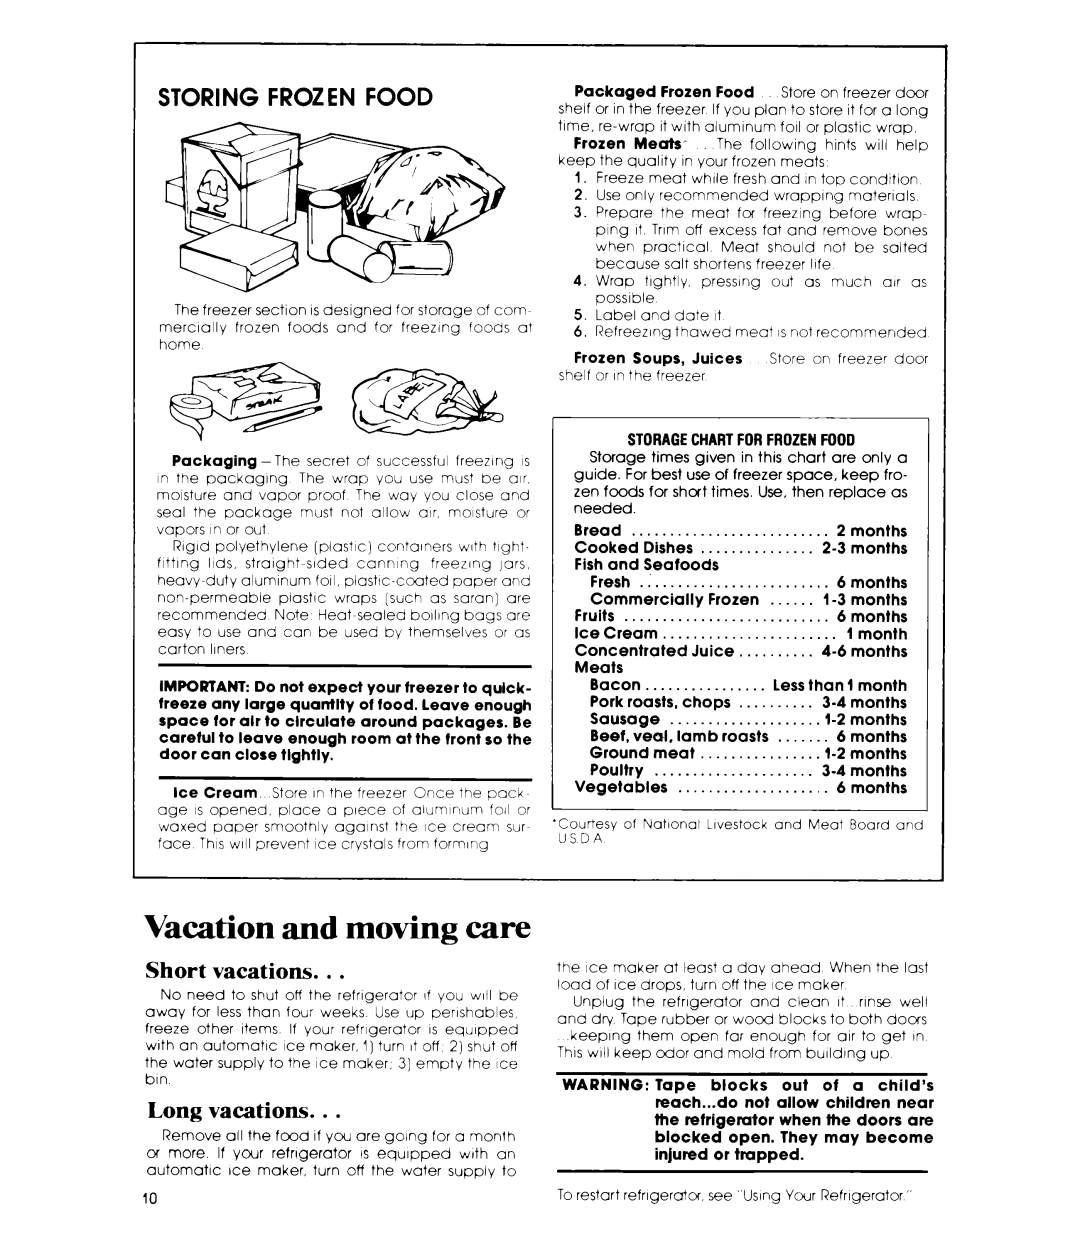 Whirlpool ET16EP manual Vacation and moving care, Storing Frozen Food, Short vacations, Long vacations 